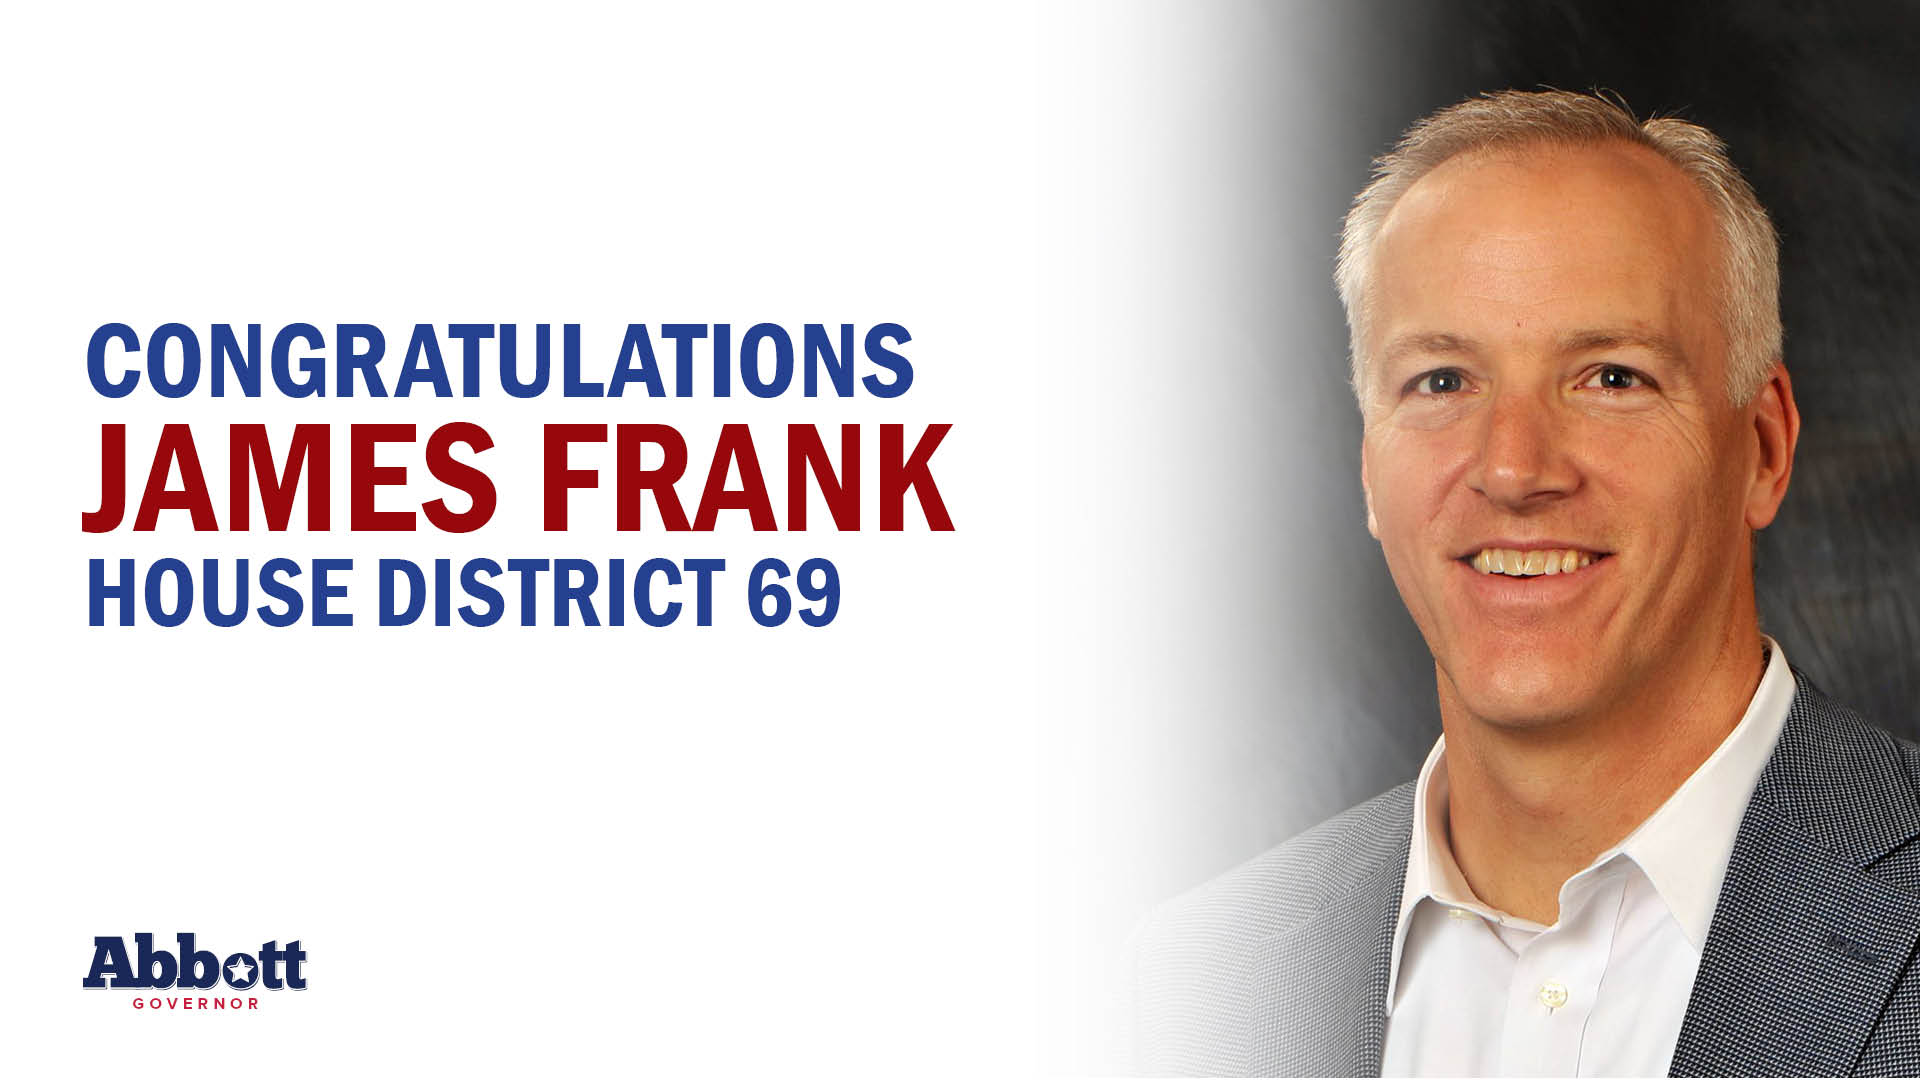 Governor Abbott Lauds James Frank Re-Election Victory In House District 69